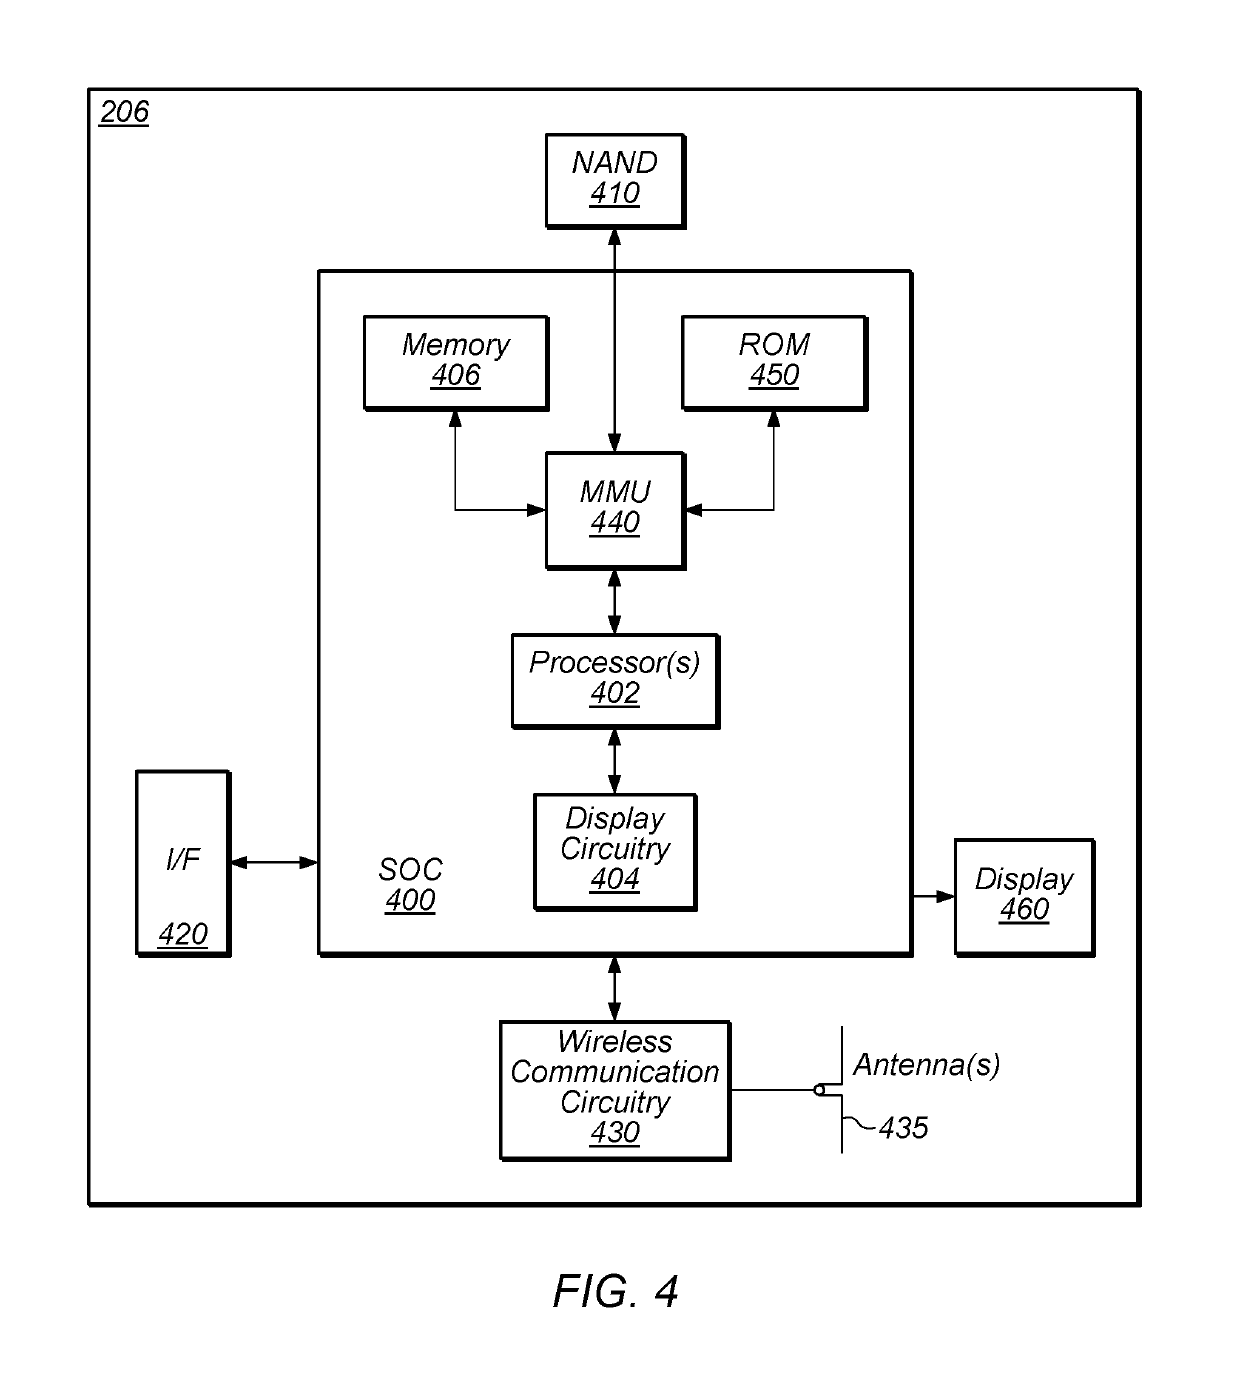 Multipath Transmission Control Protocol Proxy Use in a Cellular Network